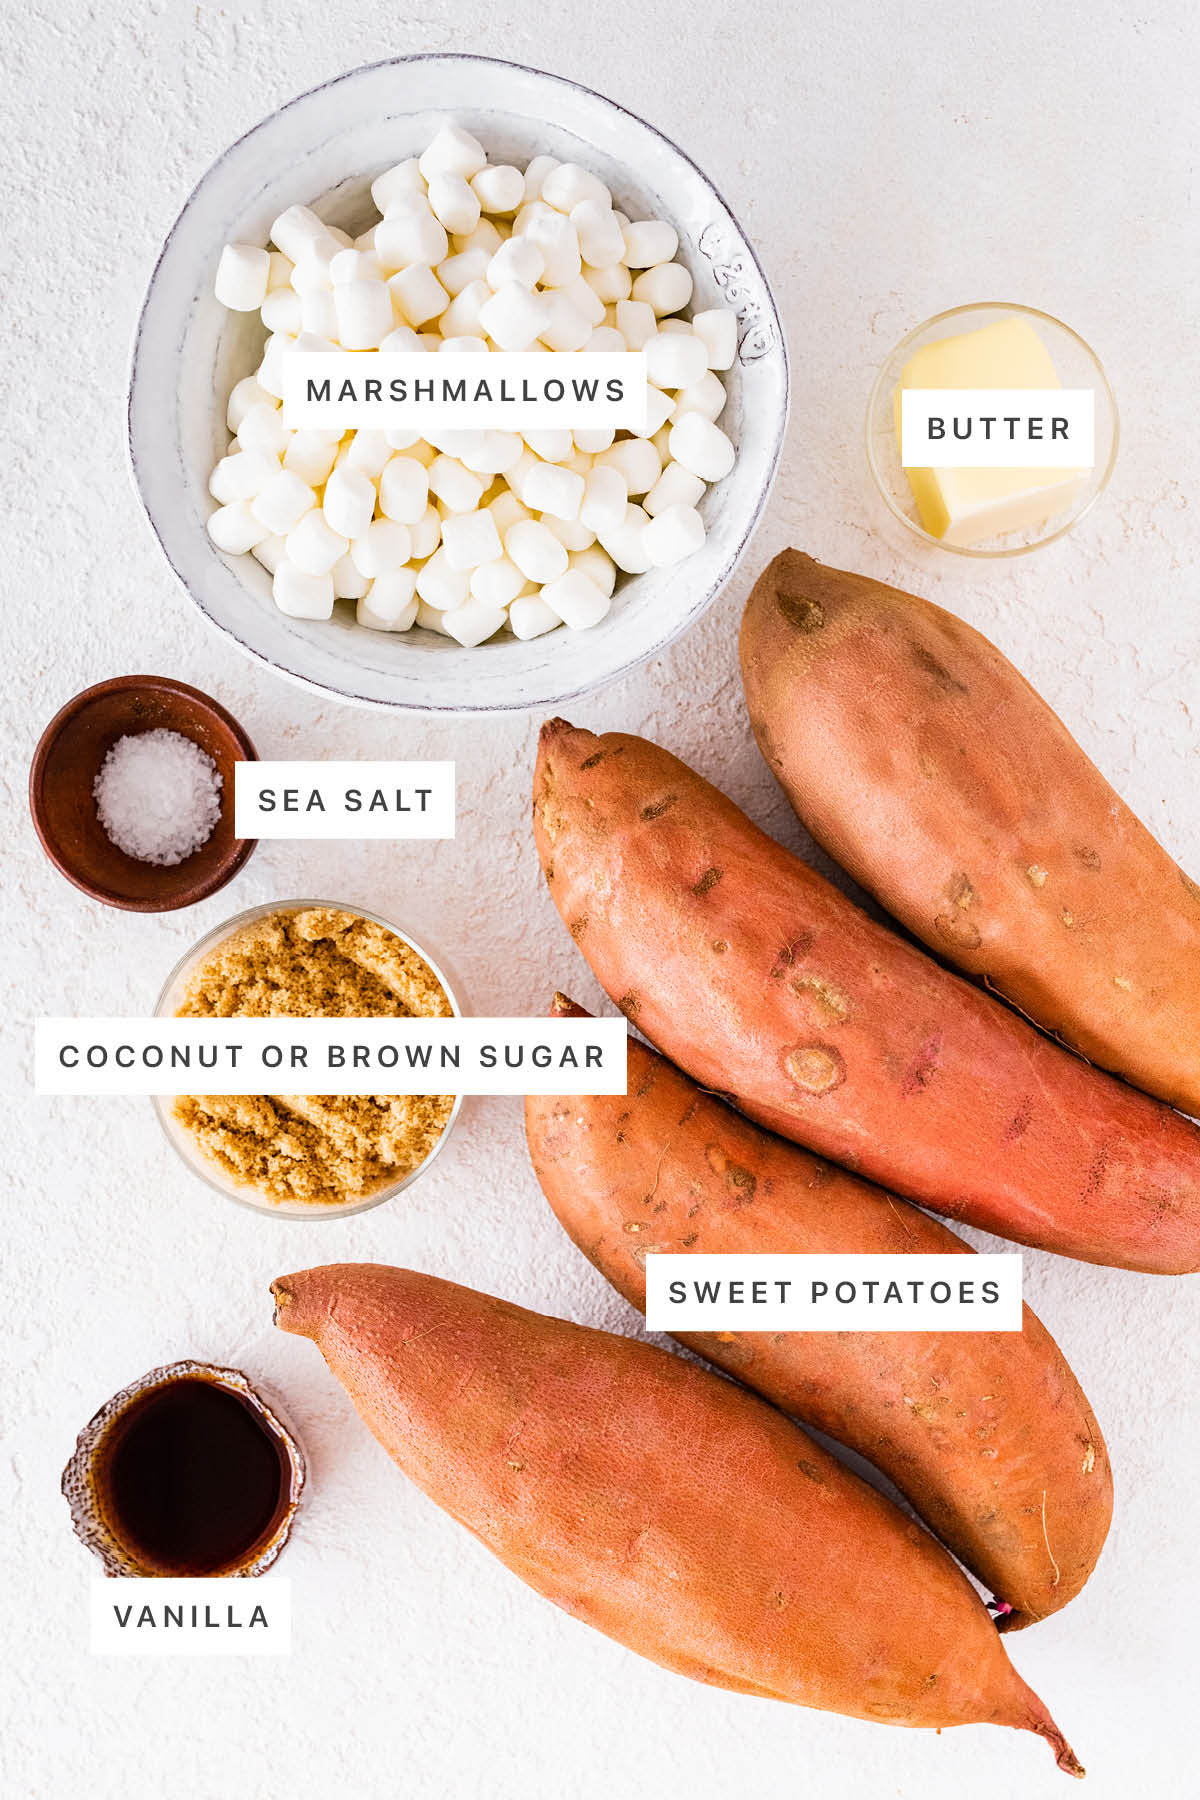 Ingredients measured out to make Classic Sweet Potato Casserole: marshmallows, butter, sea salt, coconut or brown sugar, sweet potatoes and vanilla.